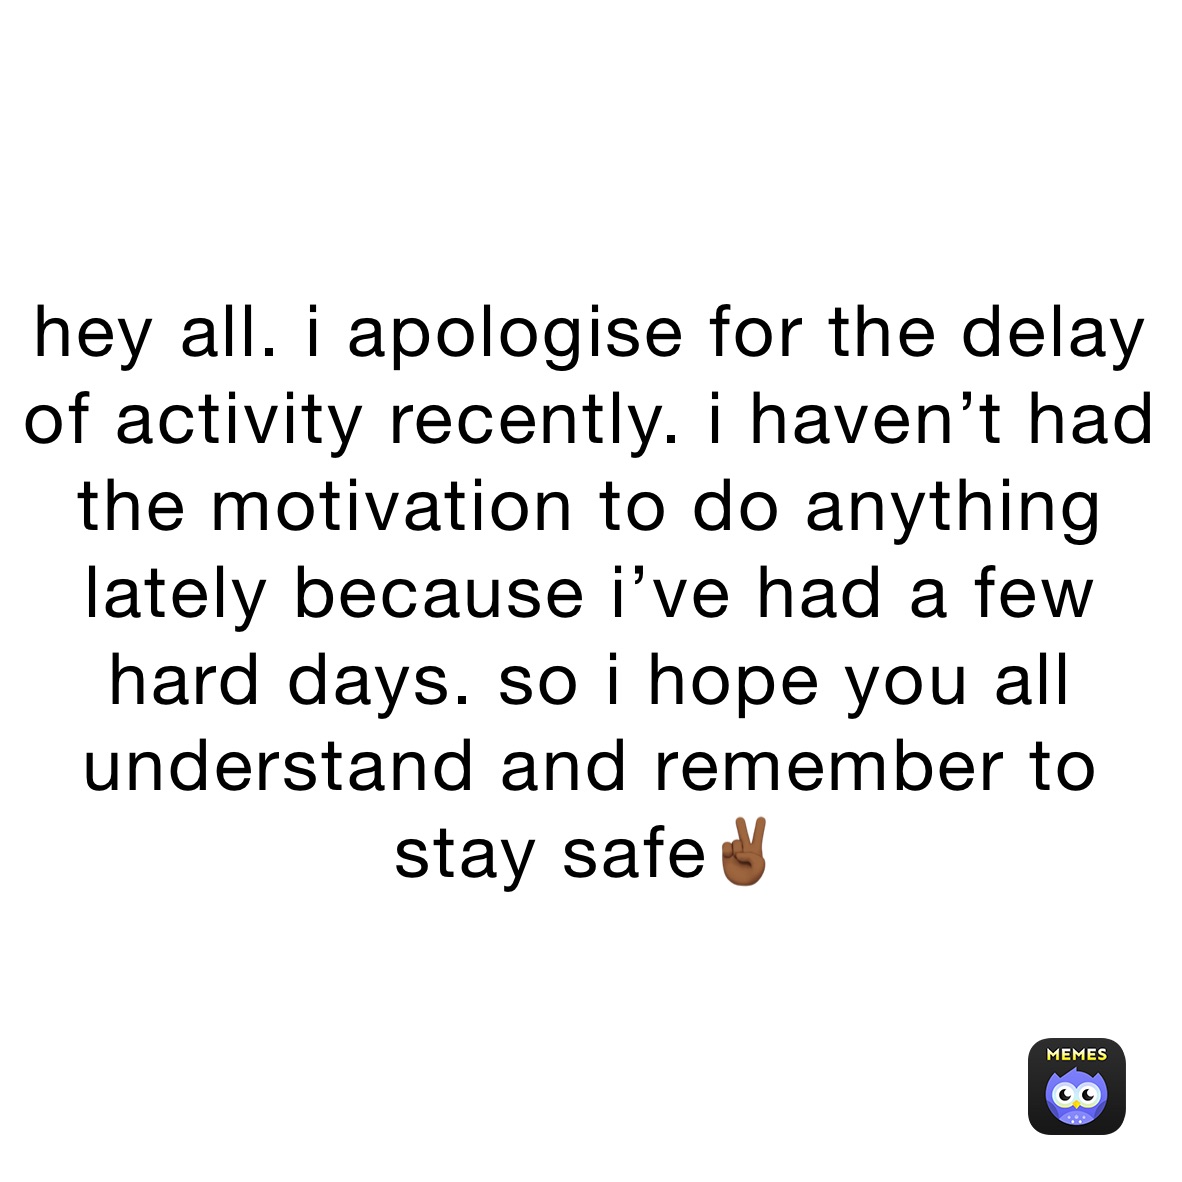 hey all. i apologise for the delay of activity recently. i haven’t had the motivation to do anything lately because i’ve had a few hard days. so i hope you all understand and remember to stay safe✌🏾